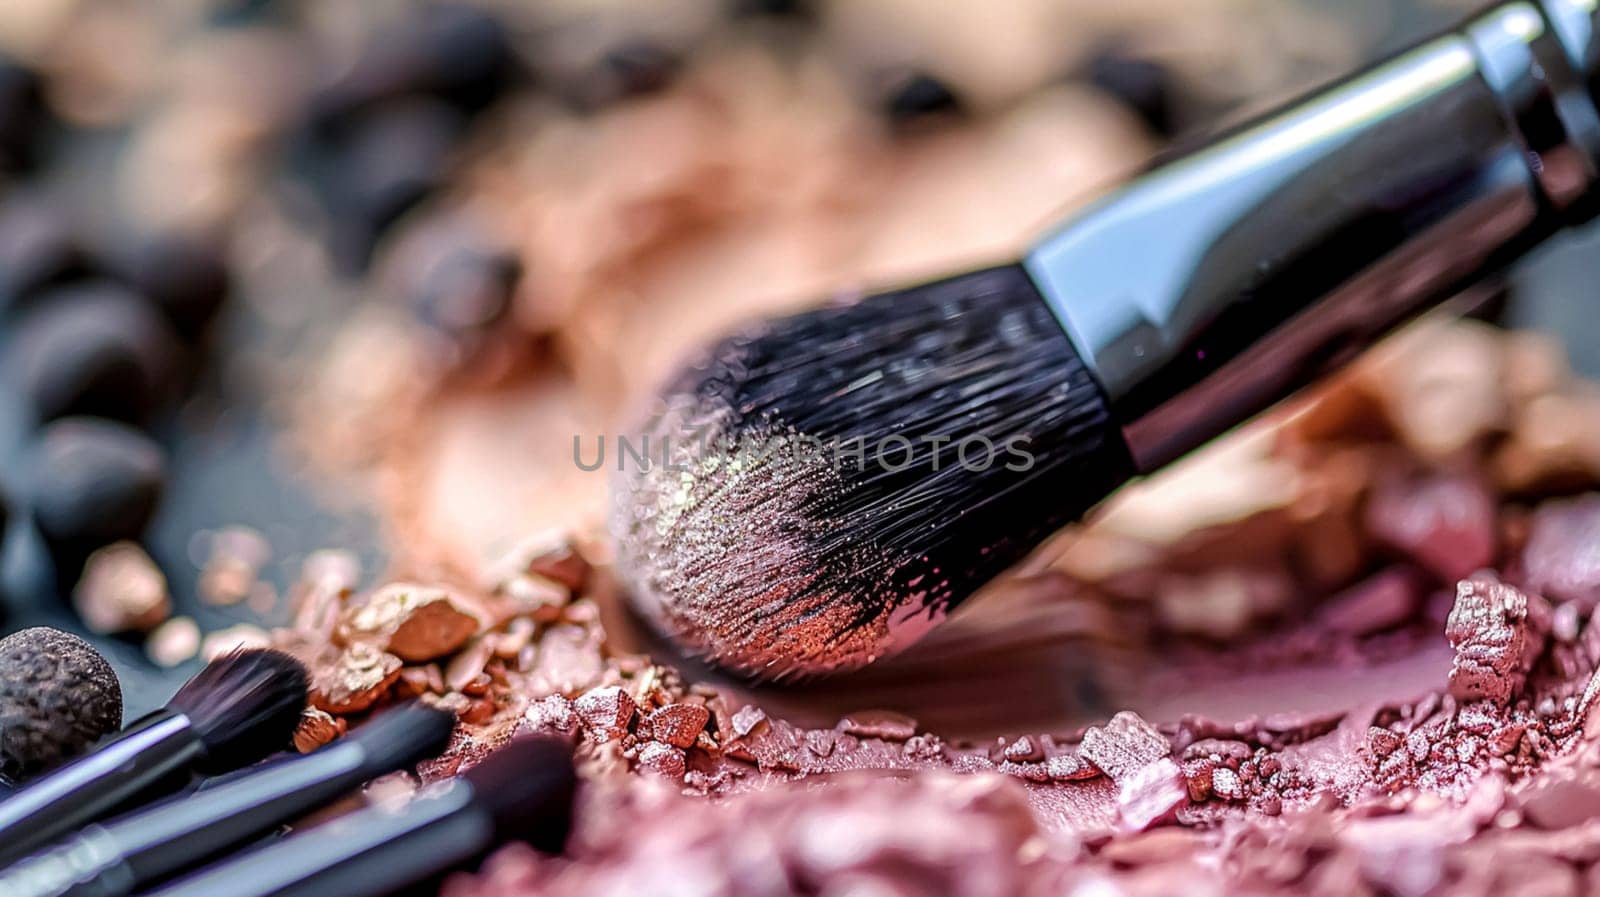 Beauty product and cosmetics texture, makeup shimmer glitter, blush eyeshadow powder as abstract luxury cosmetic background art